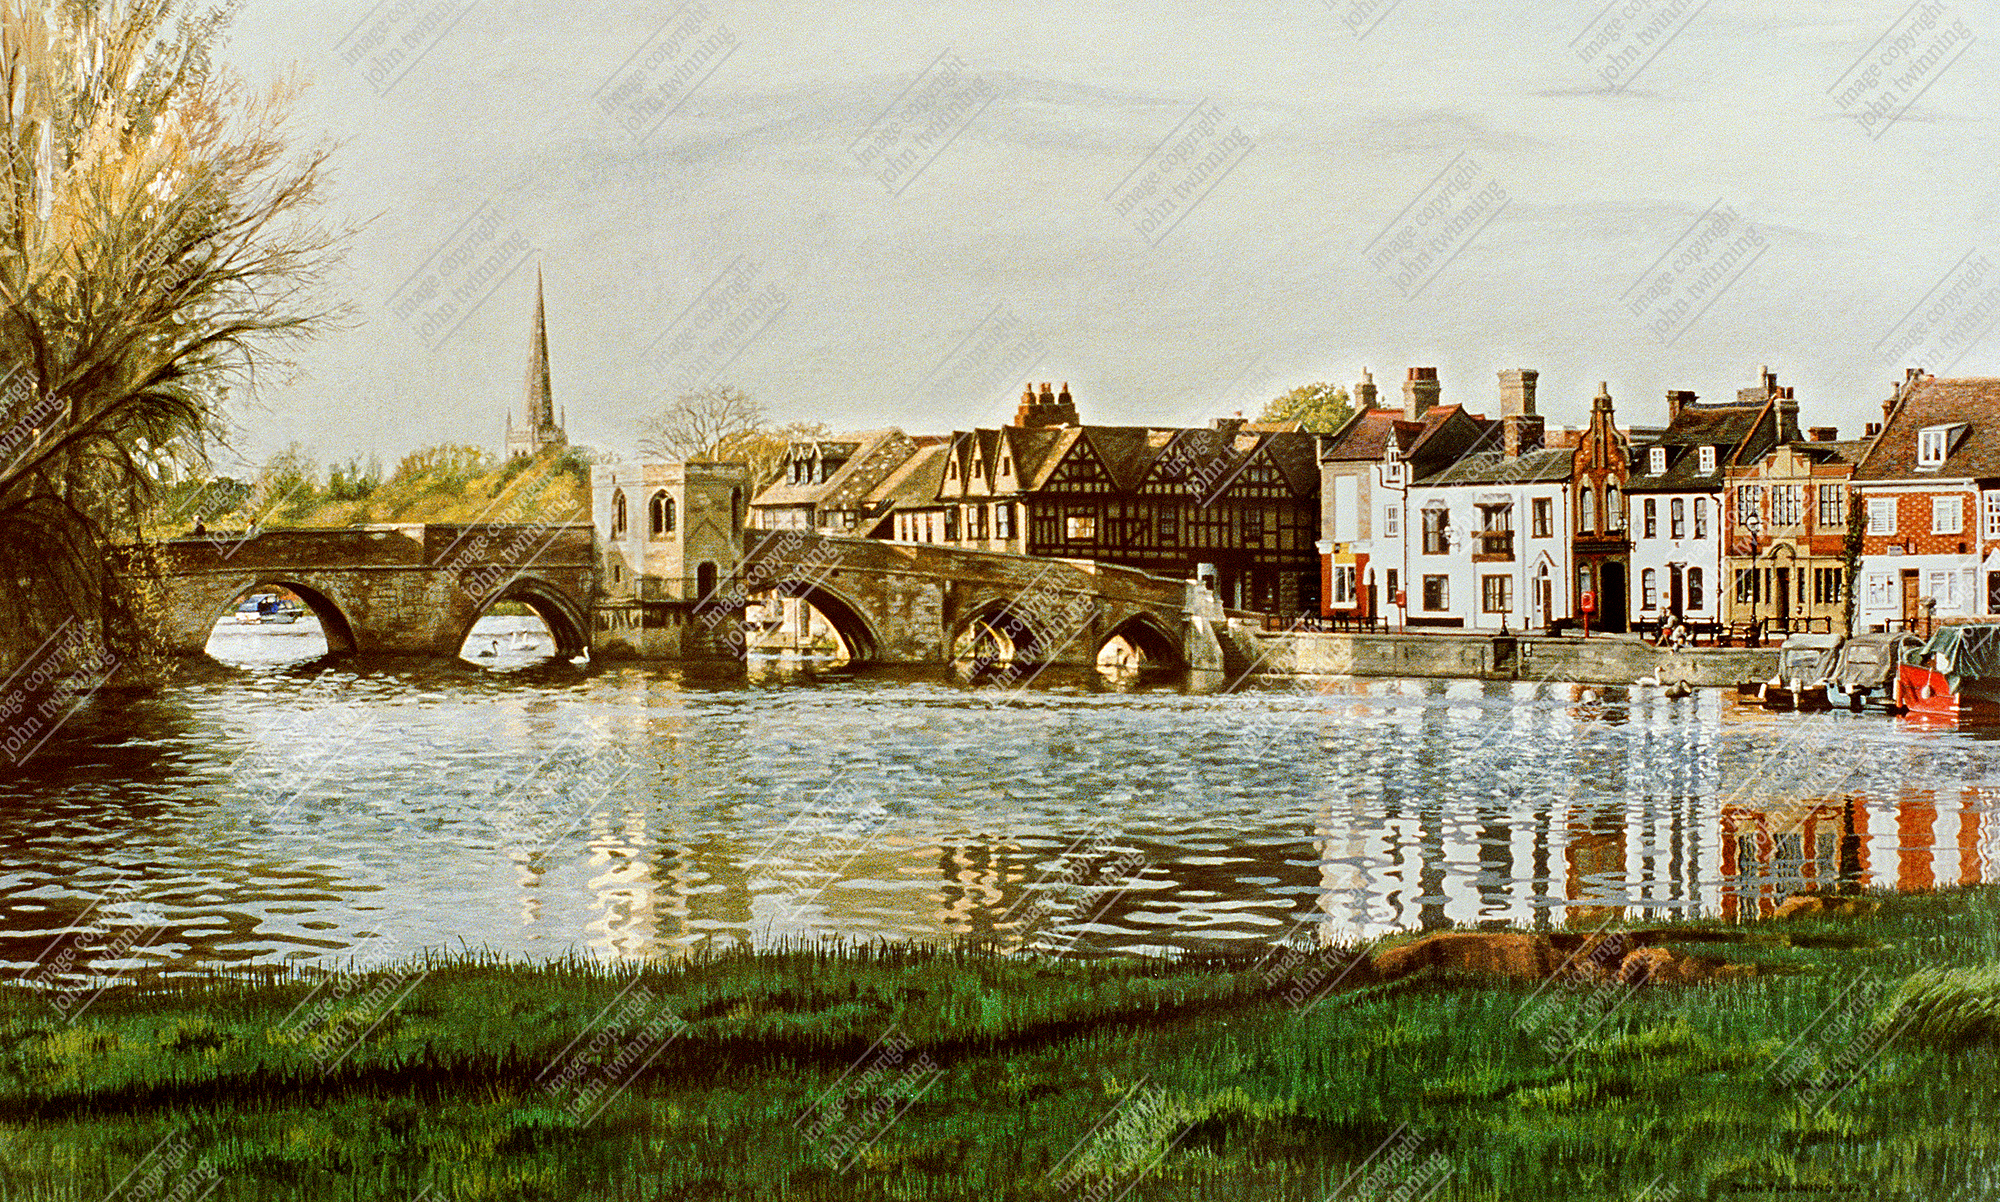 ‘The Bridge And Quay, St. Ives’- art print from a watercolour painting of this market town’s bridge reflected in the great ouse